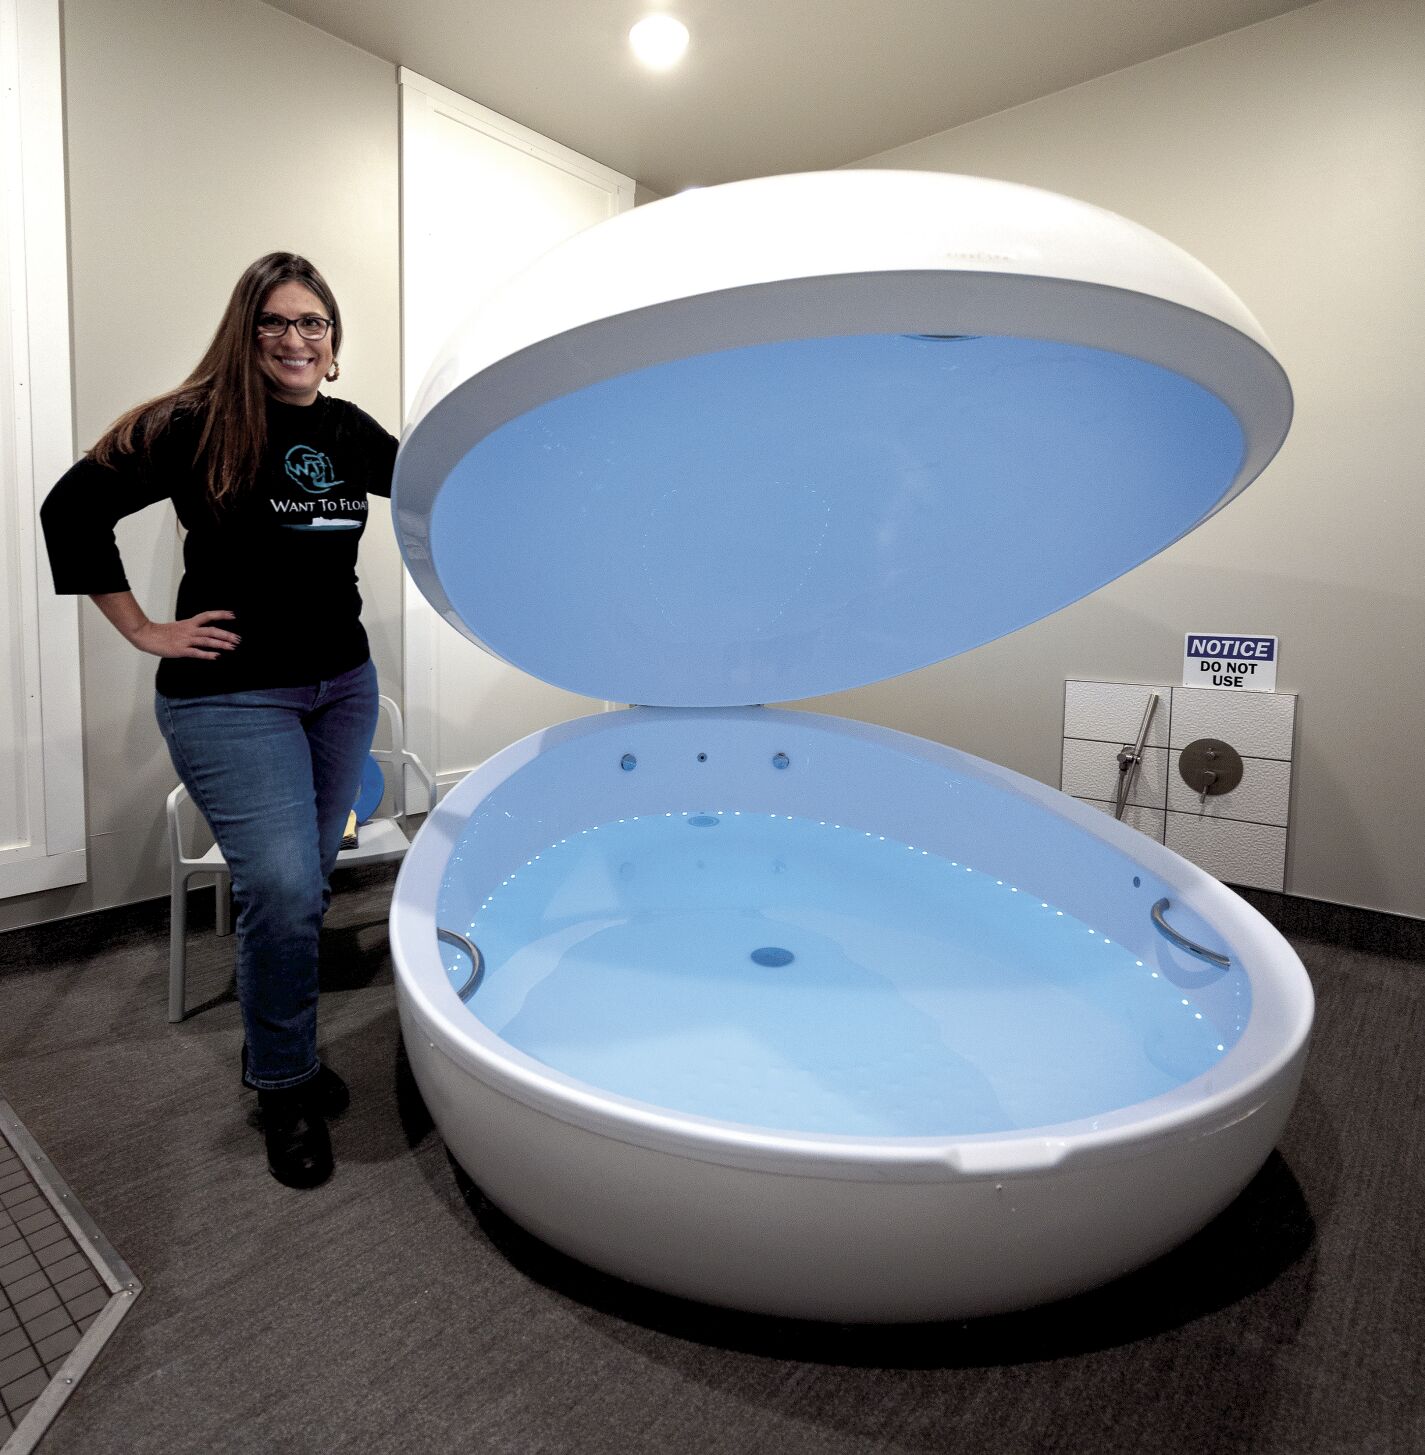 Billmeyer shows a Float Spa at Float and Fly Wellness Studio in Dubuque.    PHOTO CREDIT: Stephen Gassman